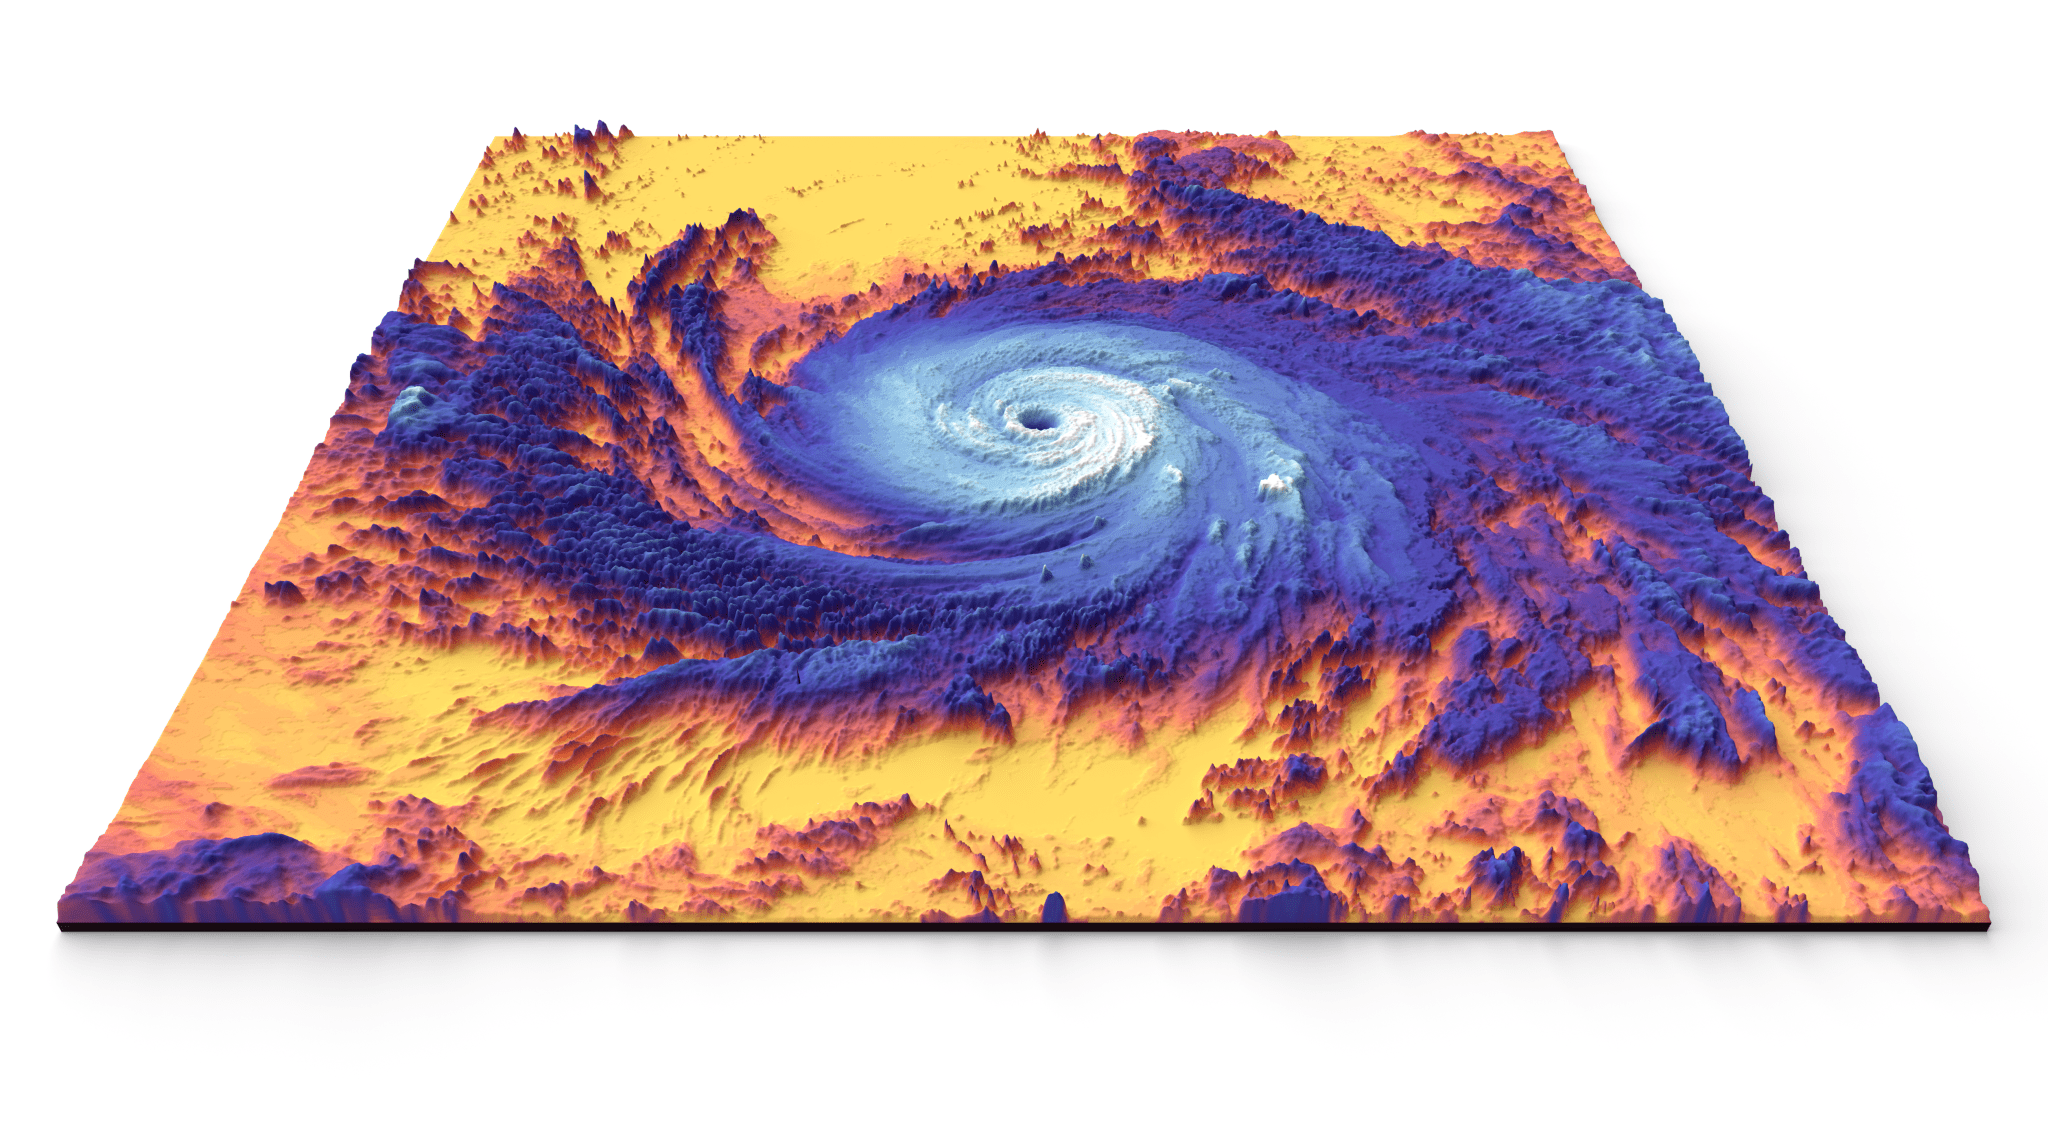 False color view of a swirling hurricane from space, showing the blue clouds in 3-D against a yellow ocean.